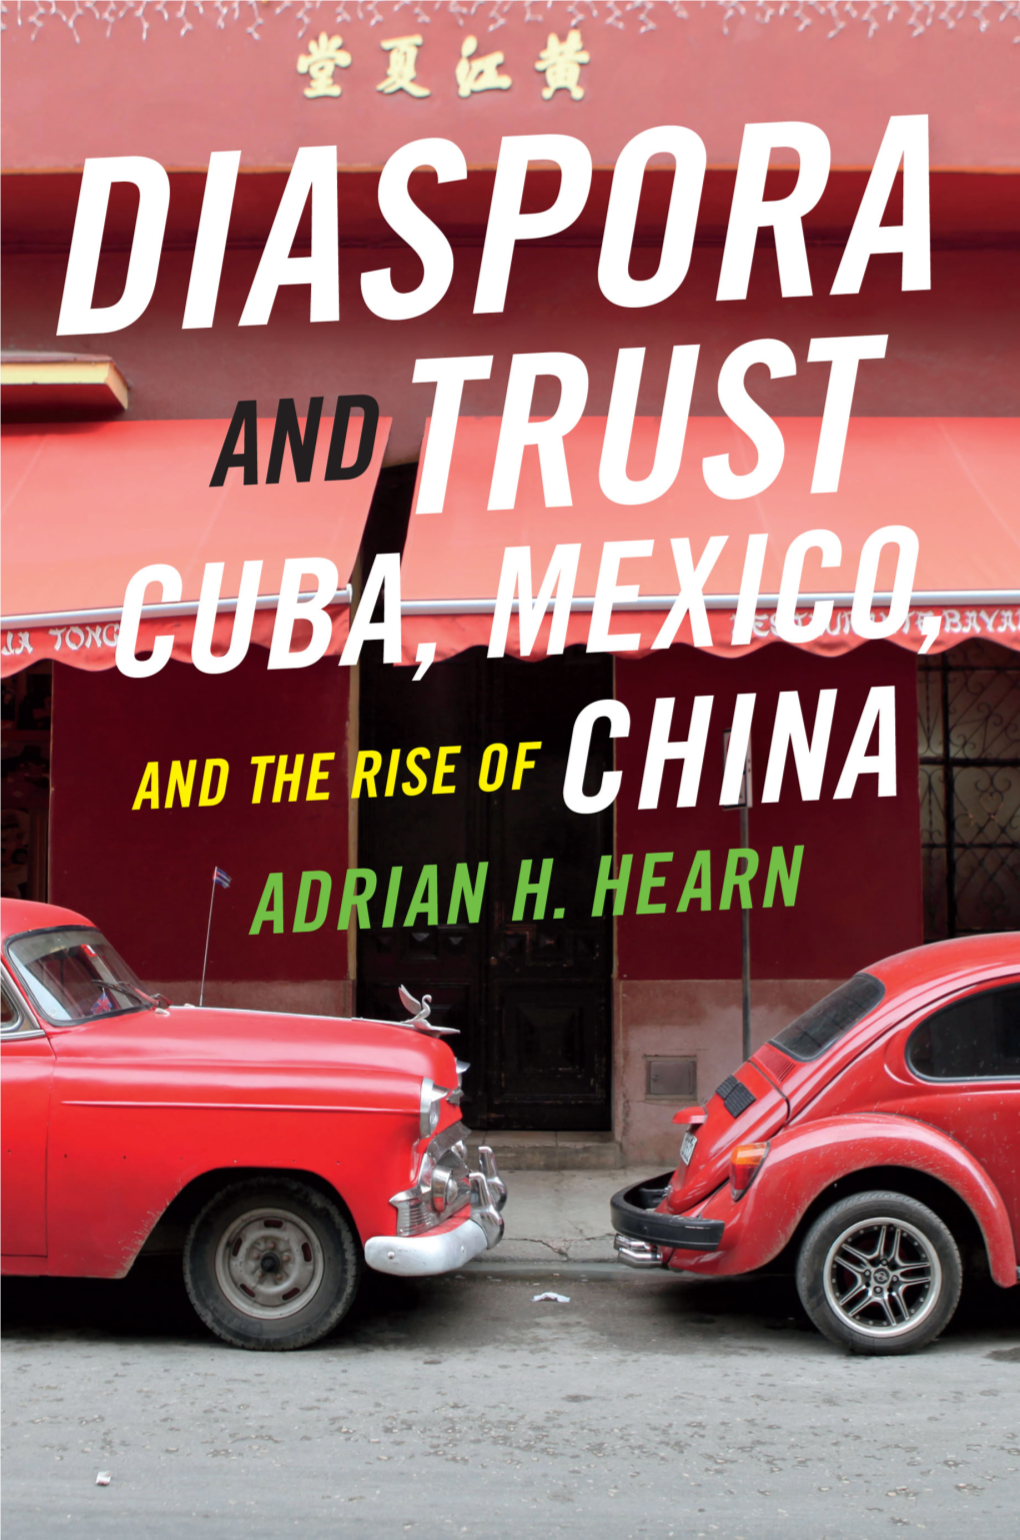 Cuba, Mexico, and the Rise of China Adrian H